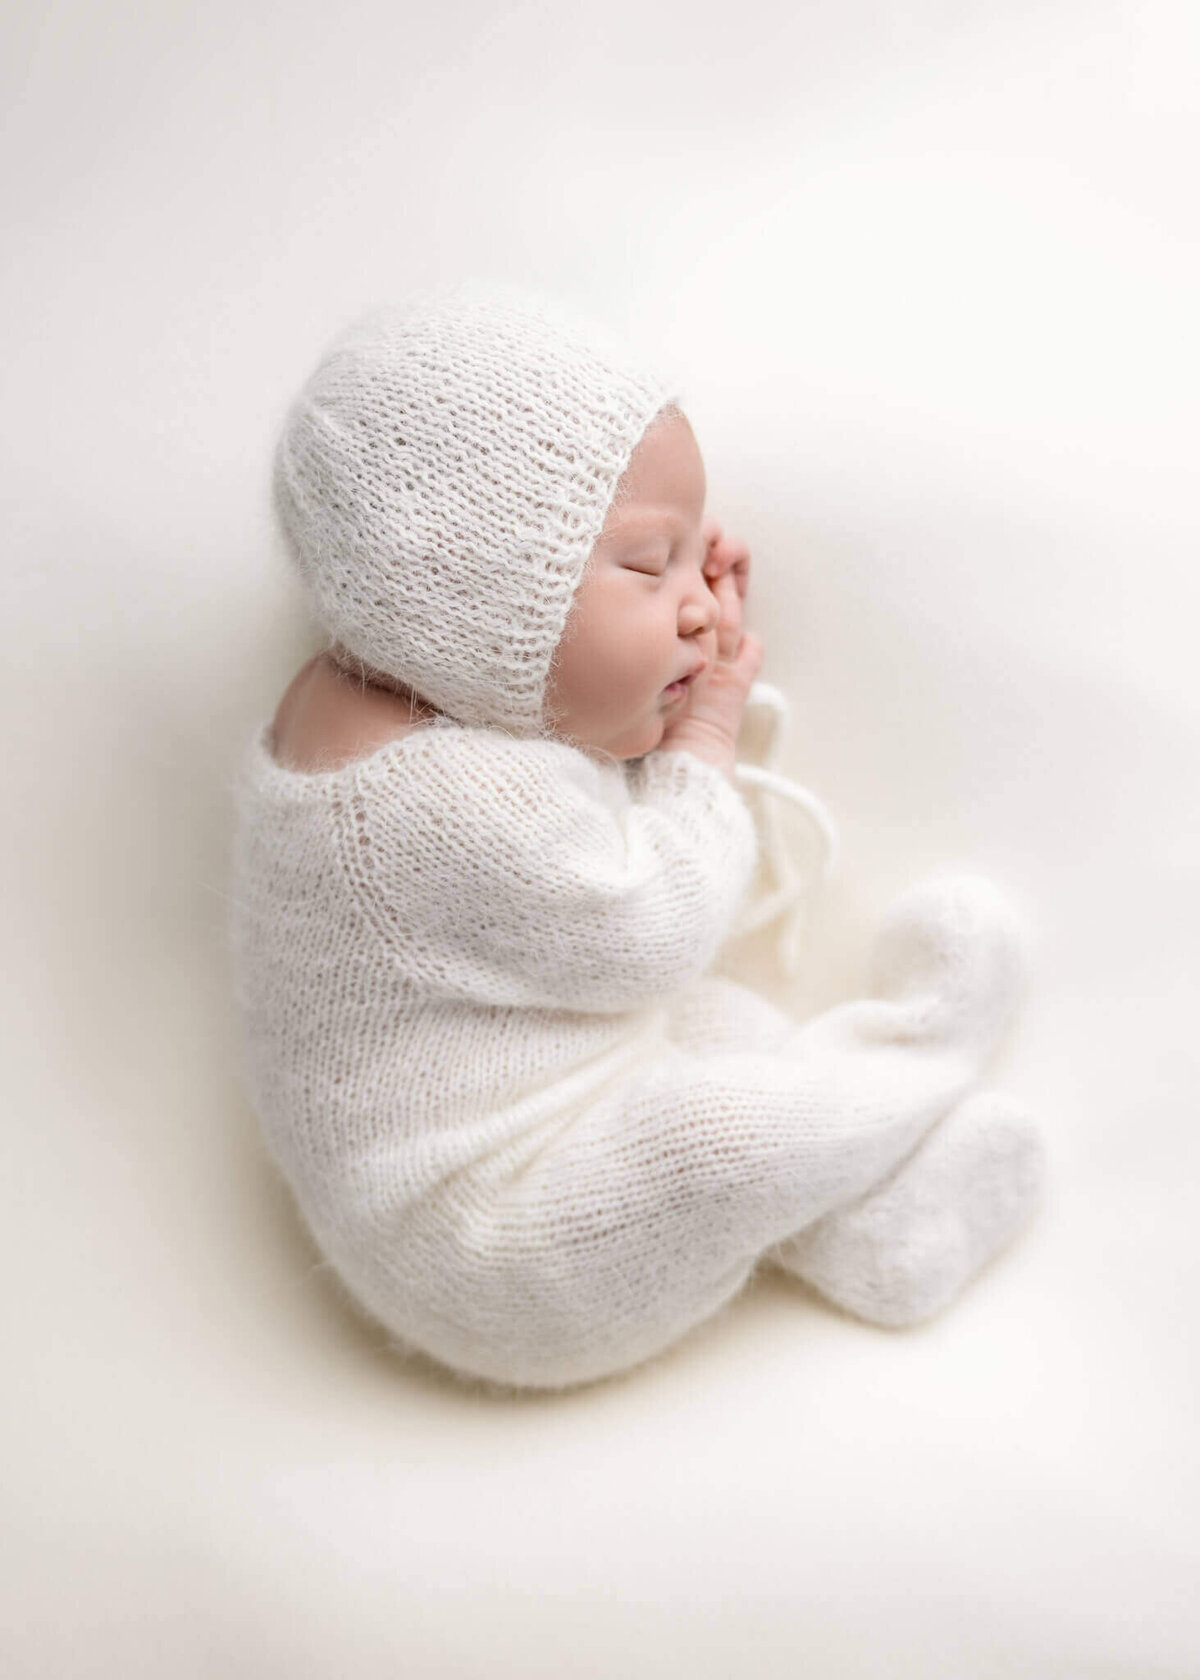 newborn baby asleep on white fabric wearing a white knitted romper and bonnet